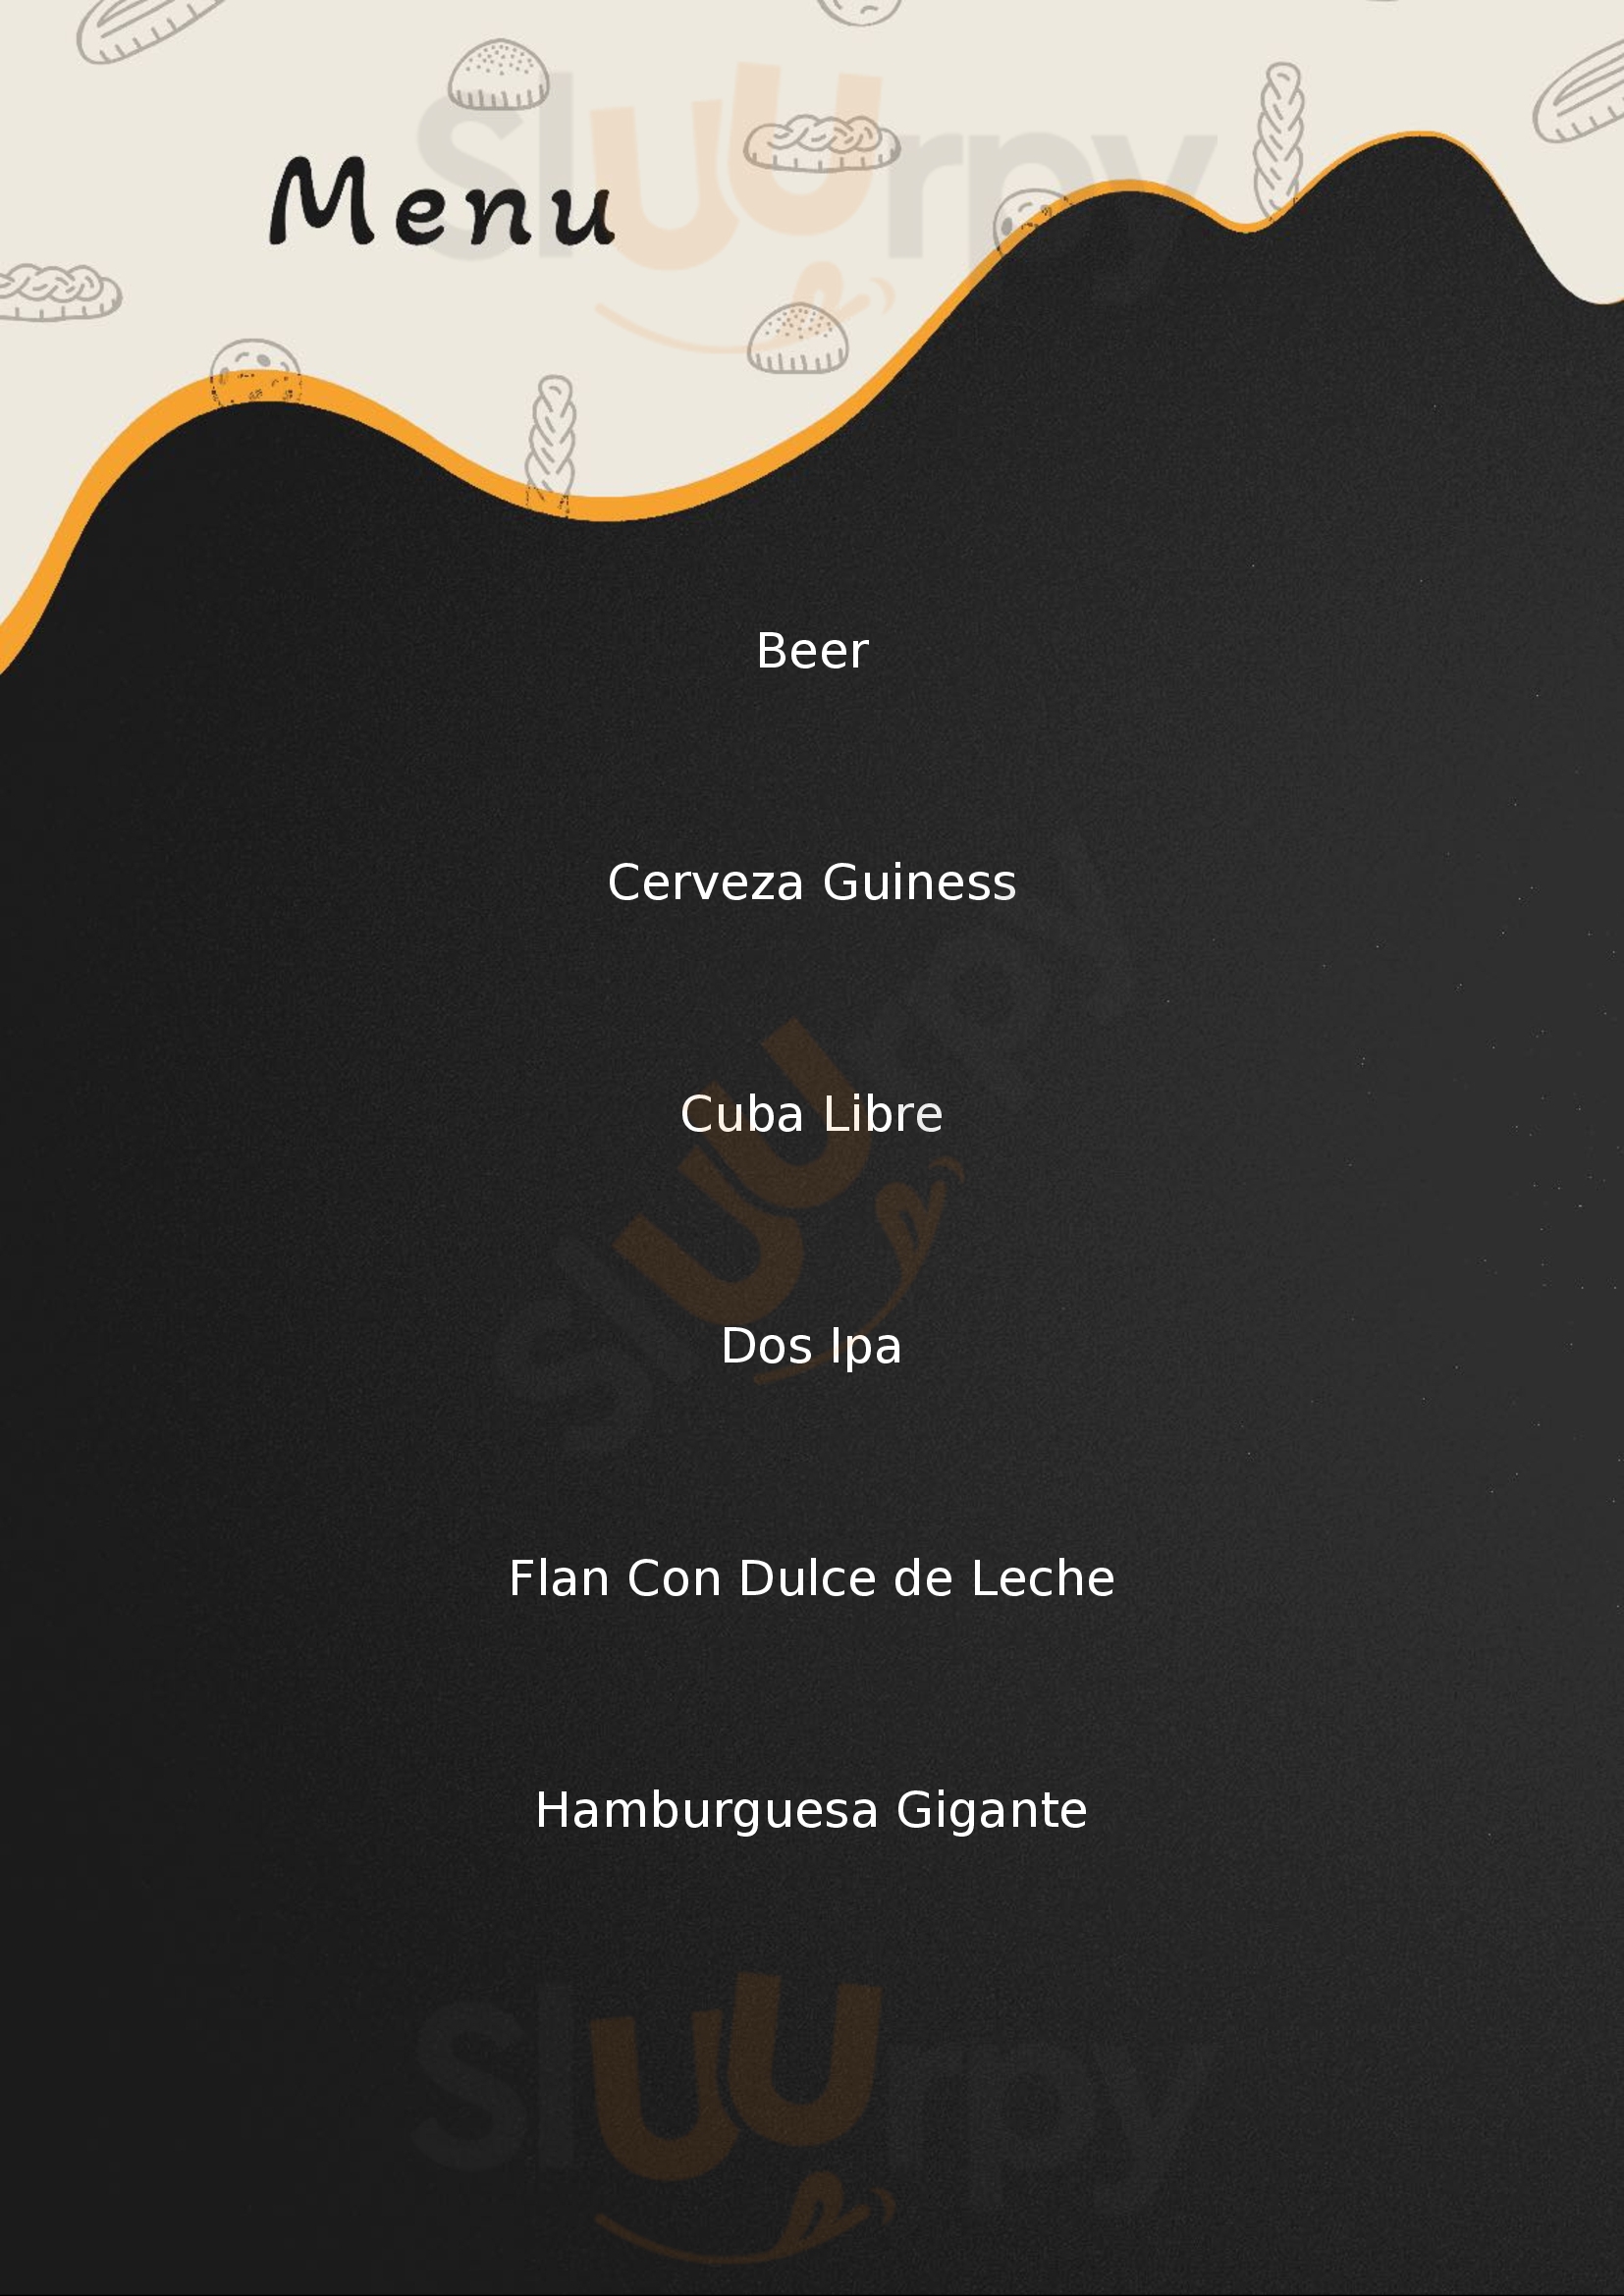 Dach's Hot Dog & Craft Beer Buenos Aires Menu - 1